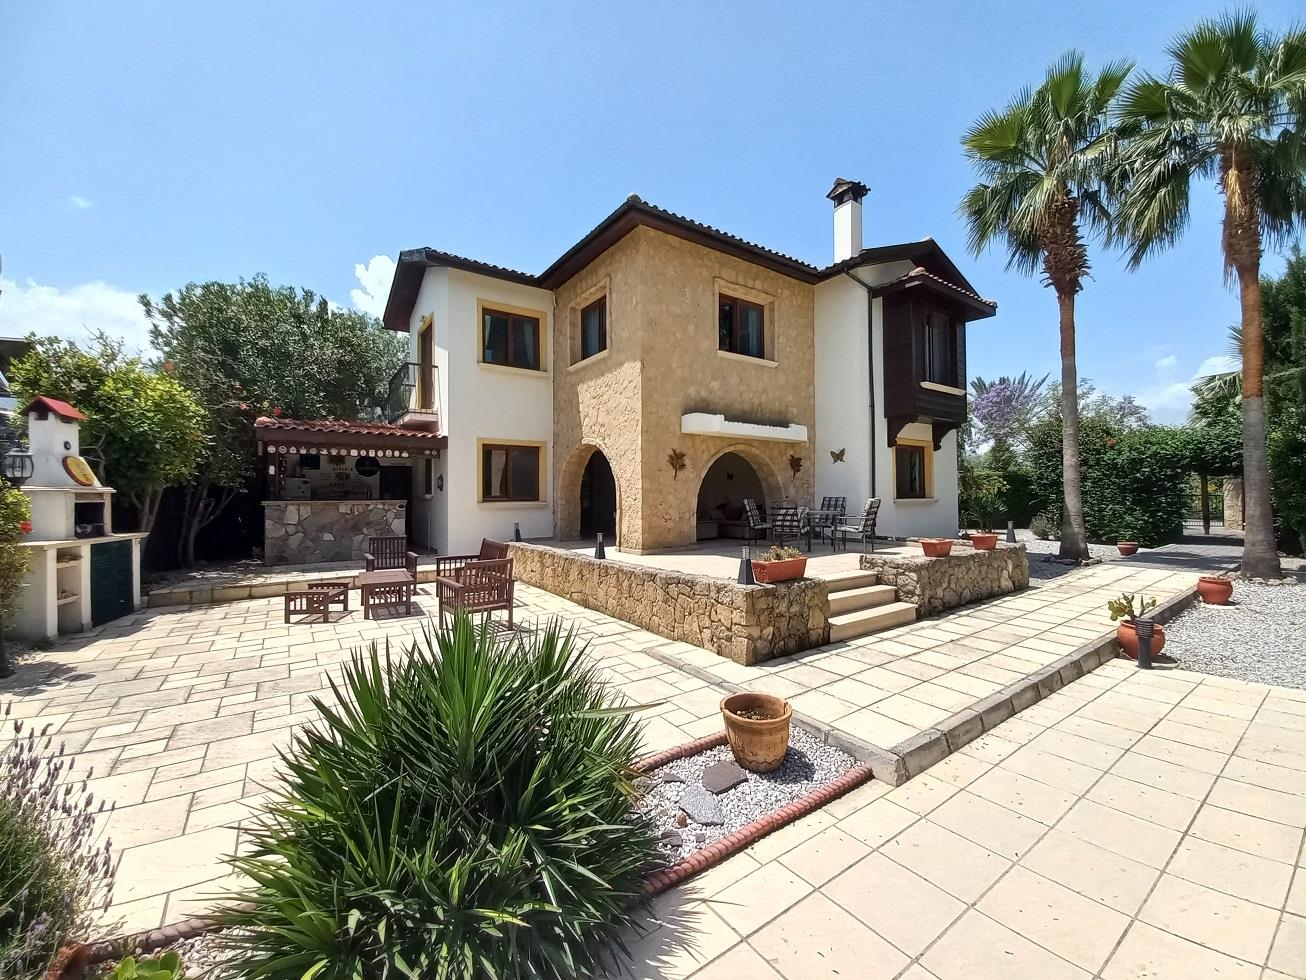 3 bed villa for sale, Catalkoy - Property Image 1